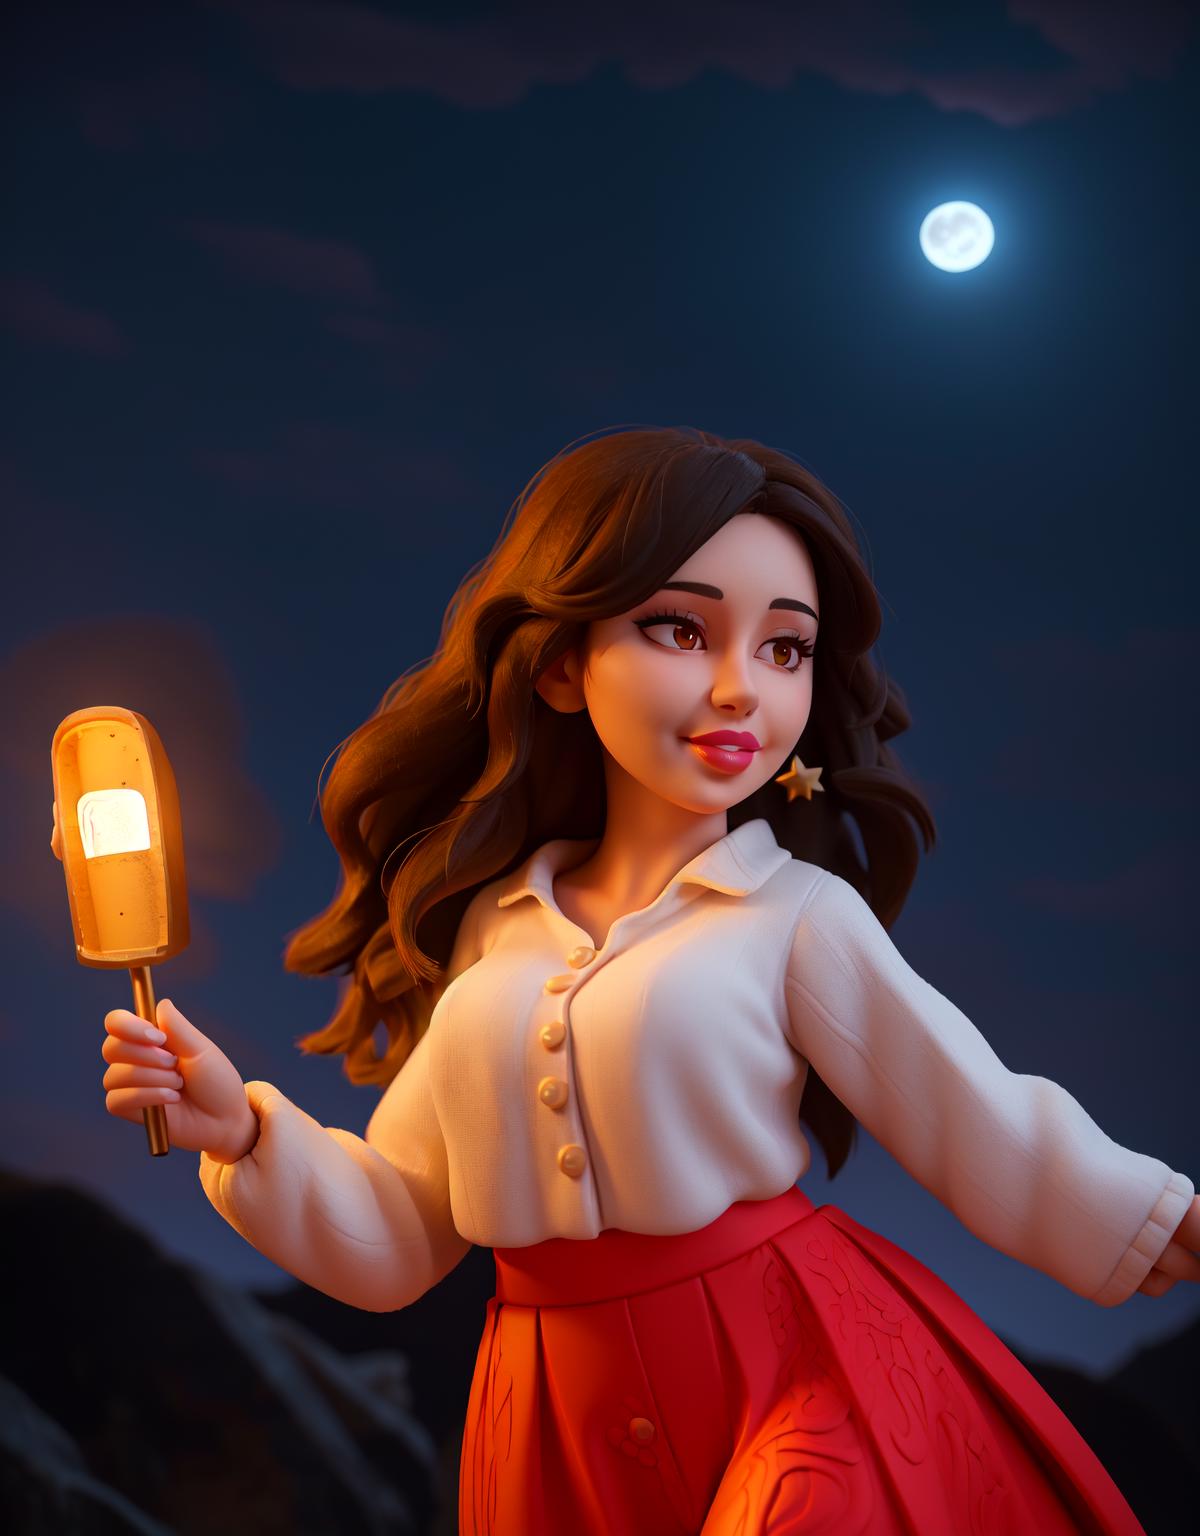 A 3D animated character holding a lantern and standing in front of the moon at night.